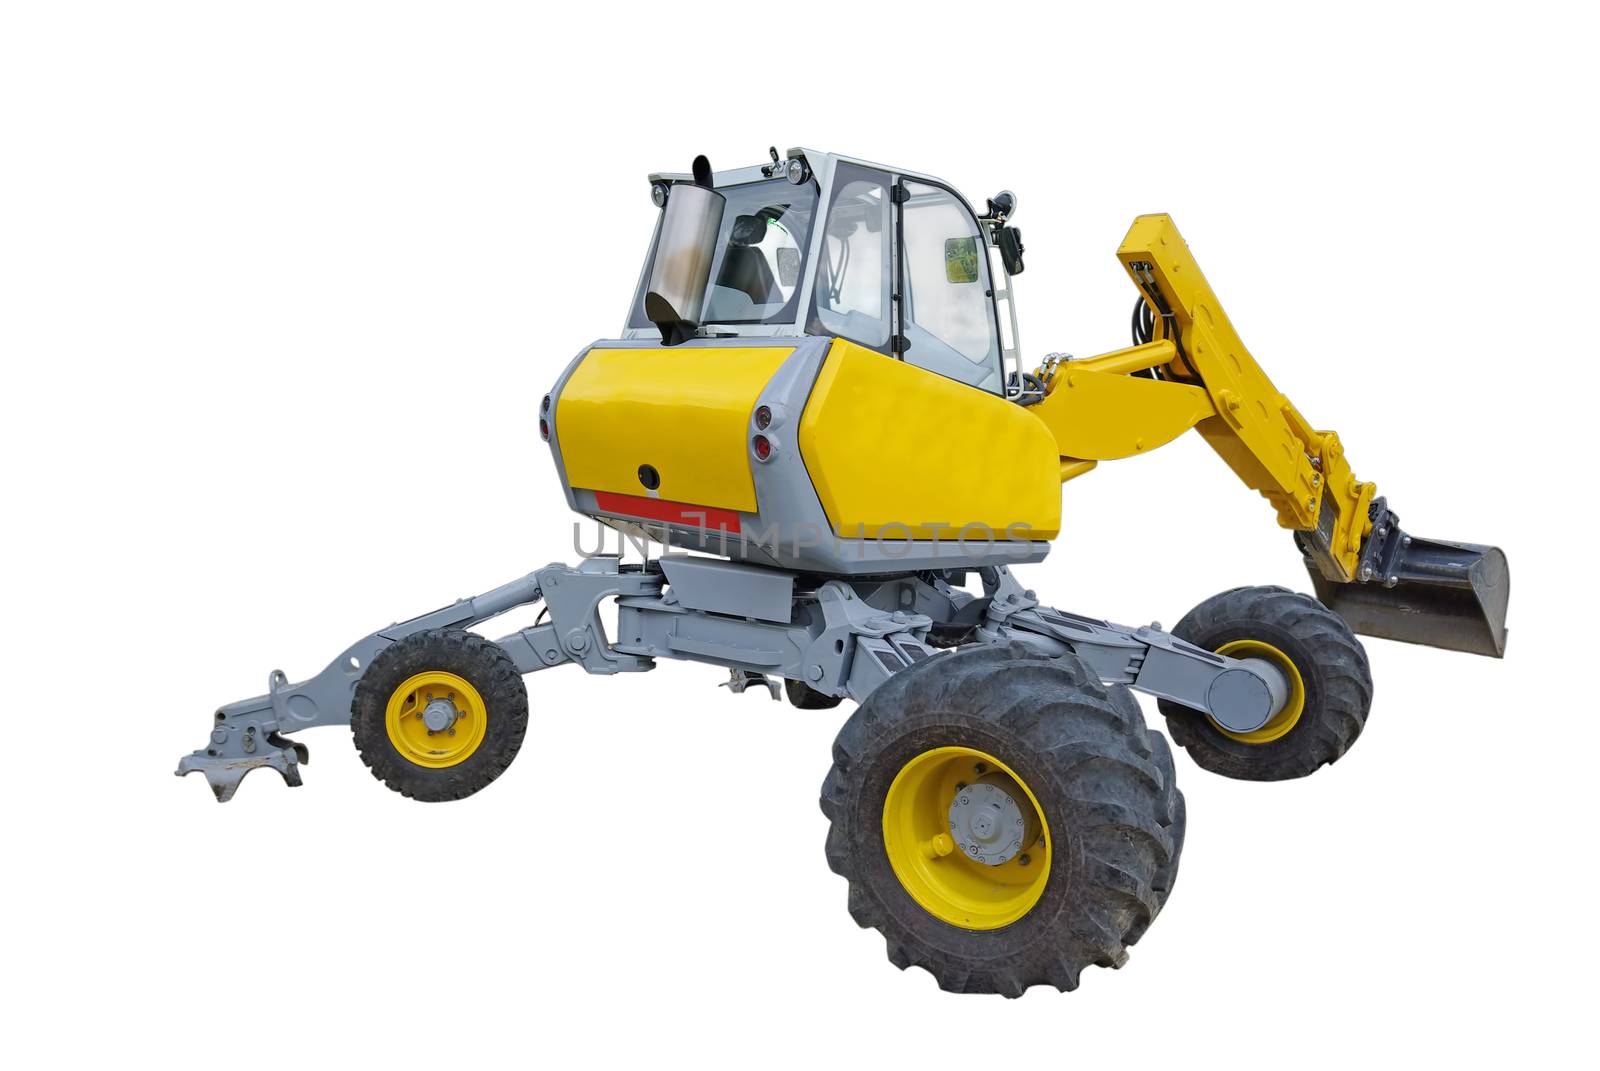 Small yellow excavator by savcoco